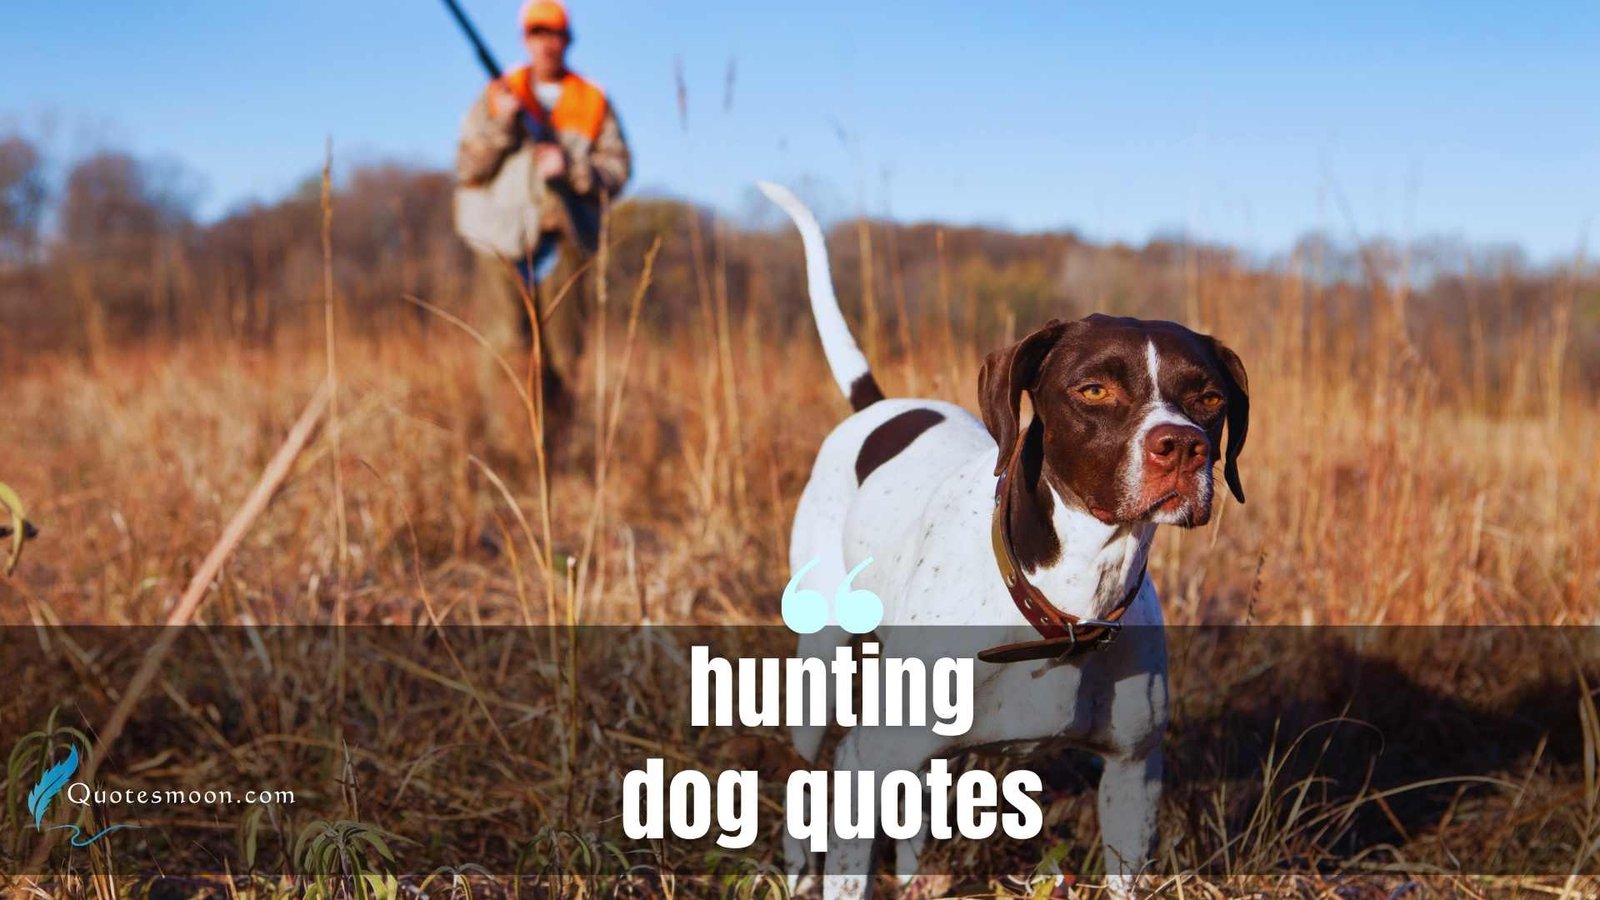 hunting dog quotes images